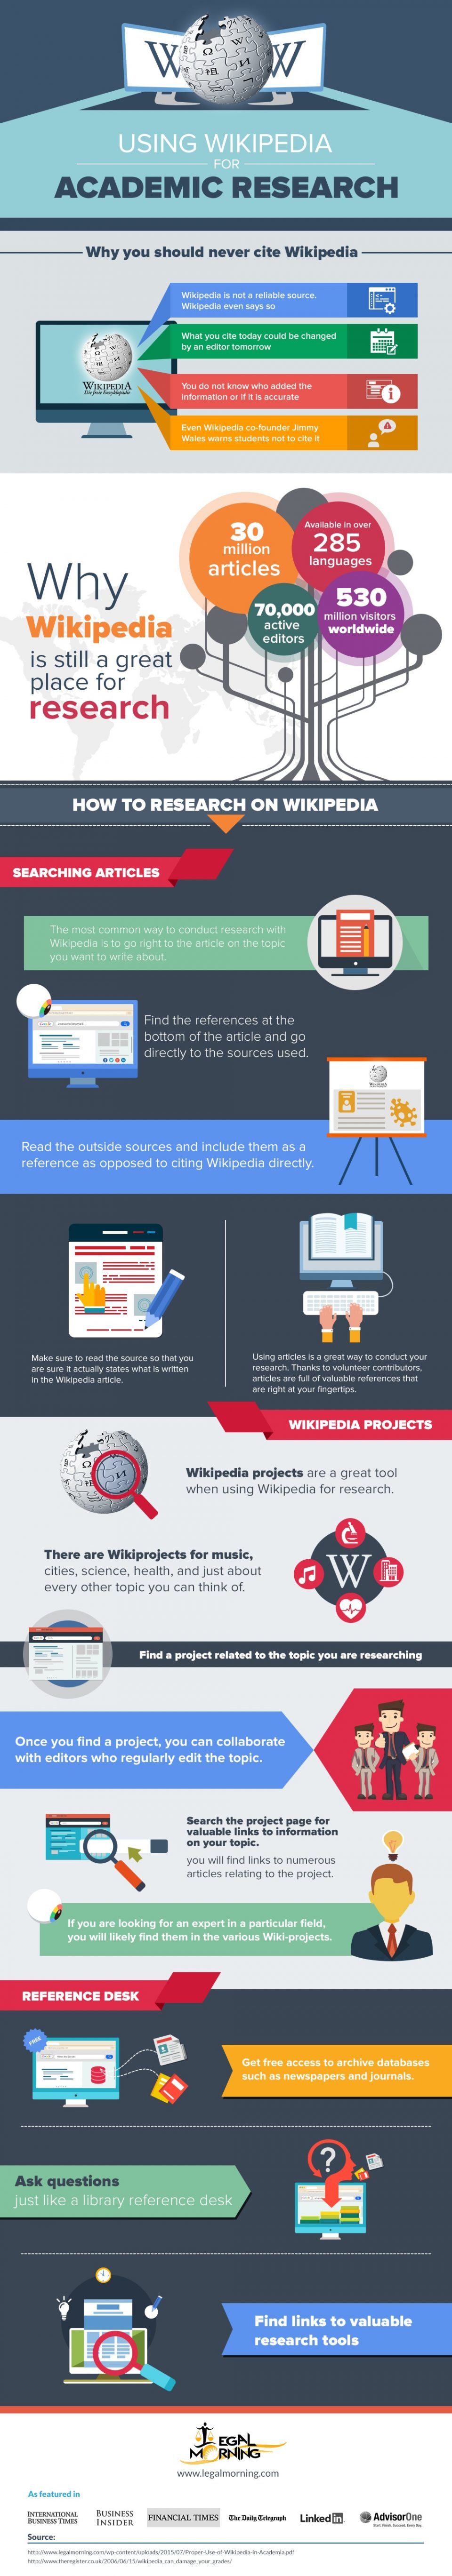 Using Wikipedia in an Academic Setting Infographic